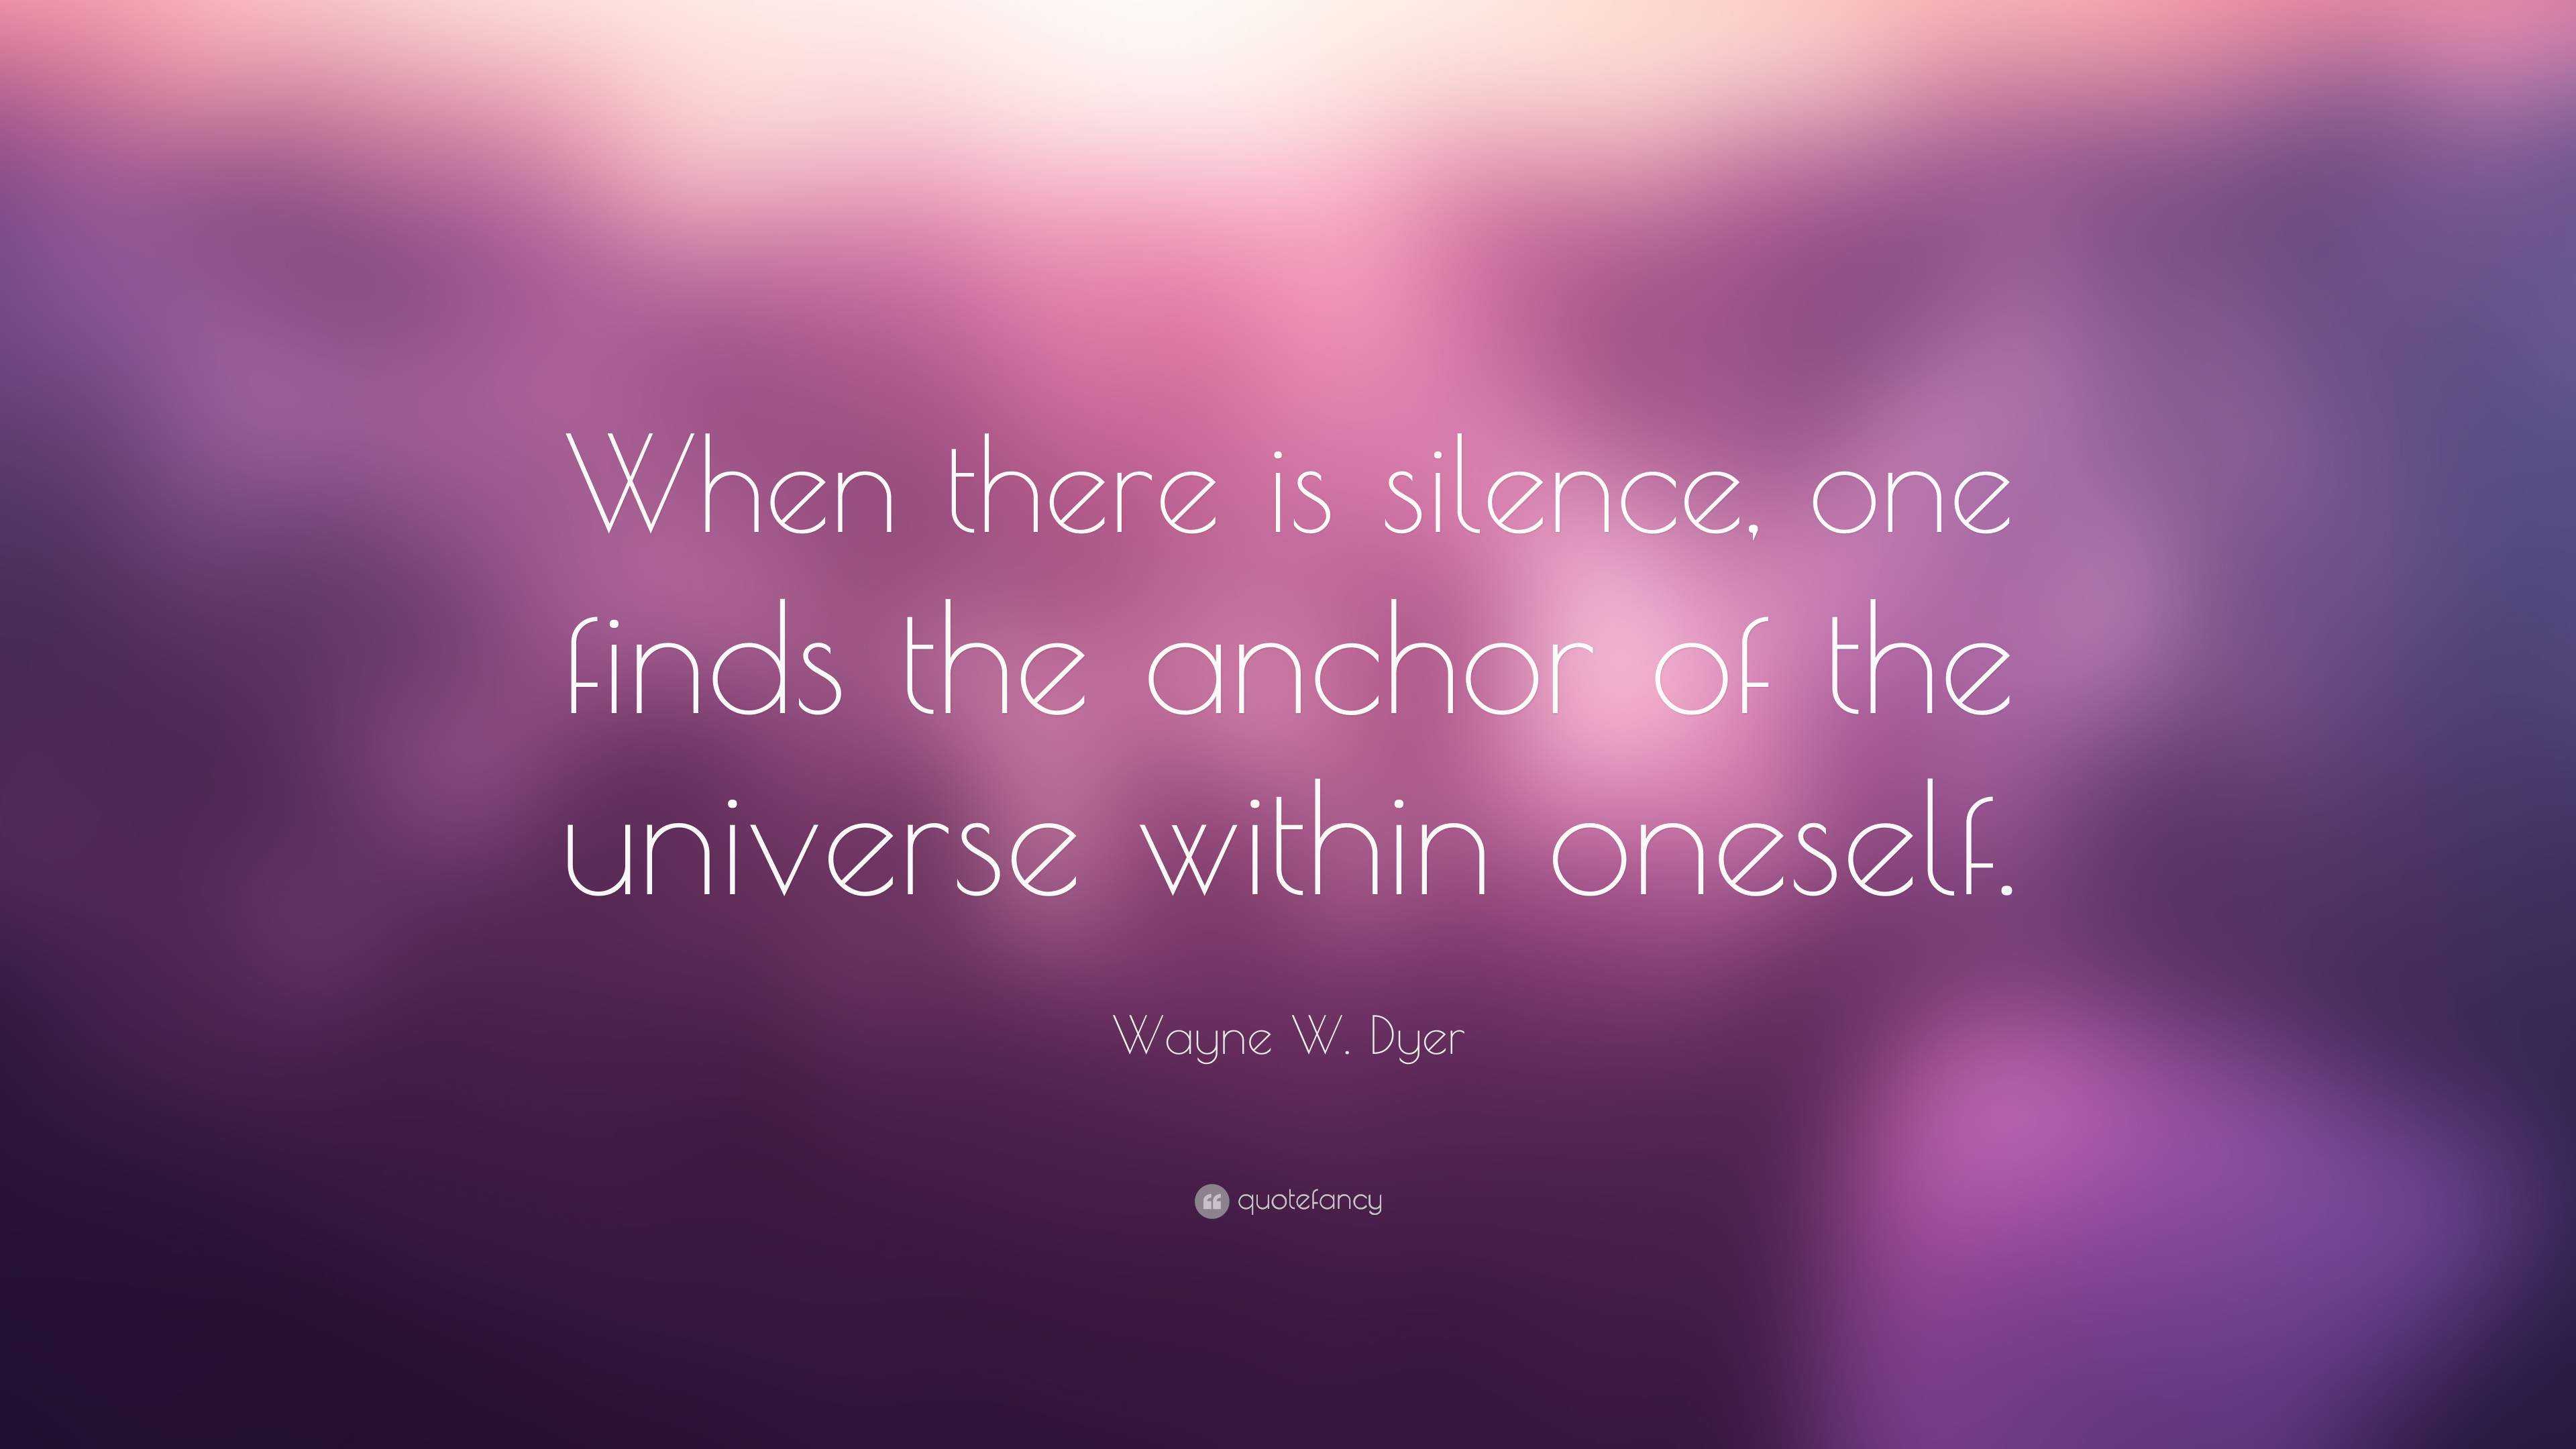 Wayne W. Dyer Quote: “When there is silence, one finds the anchor of ...